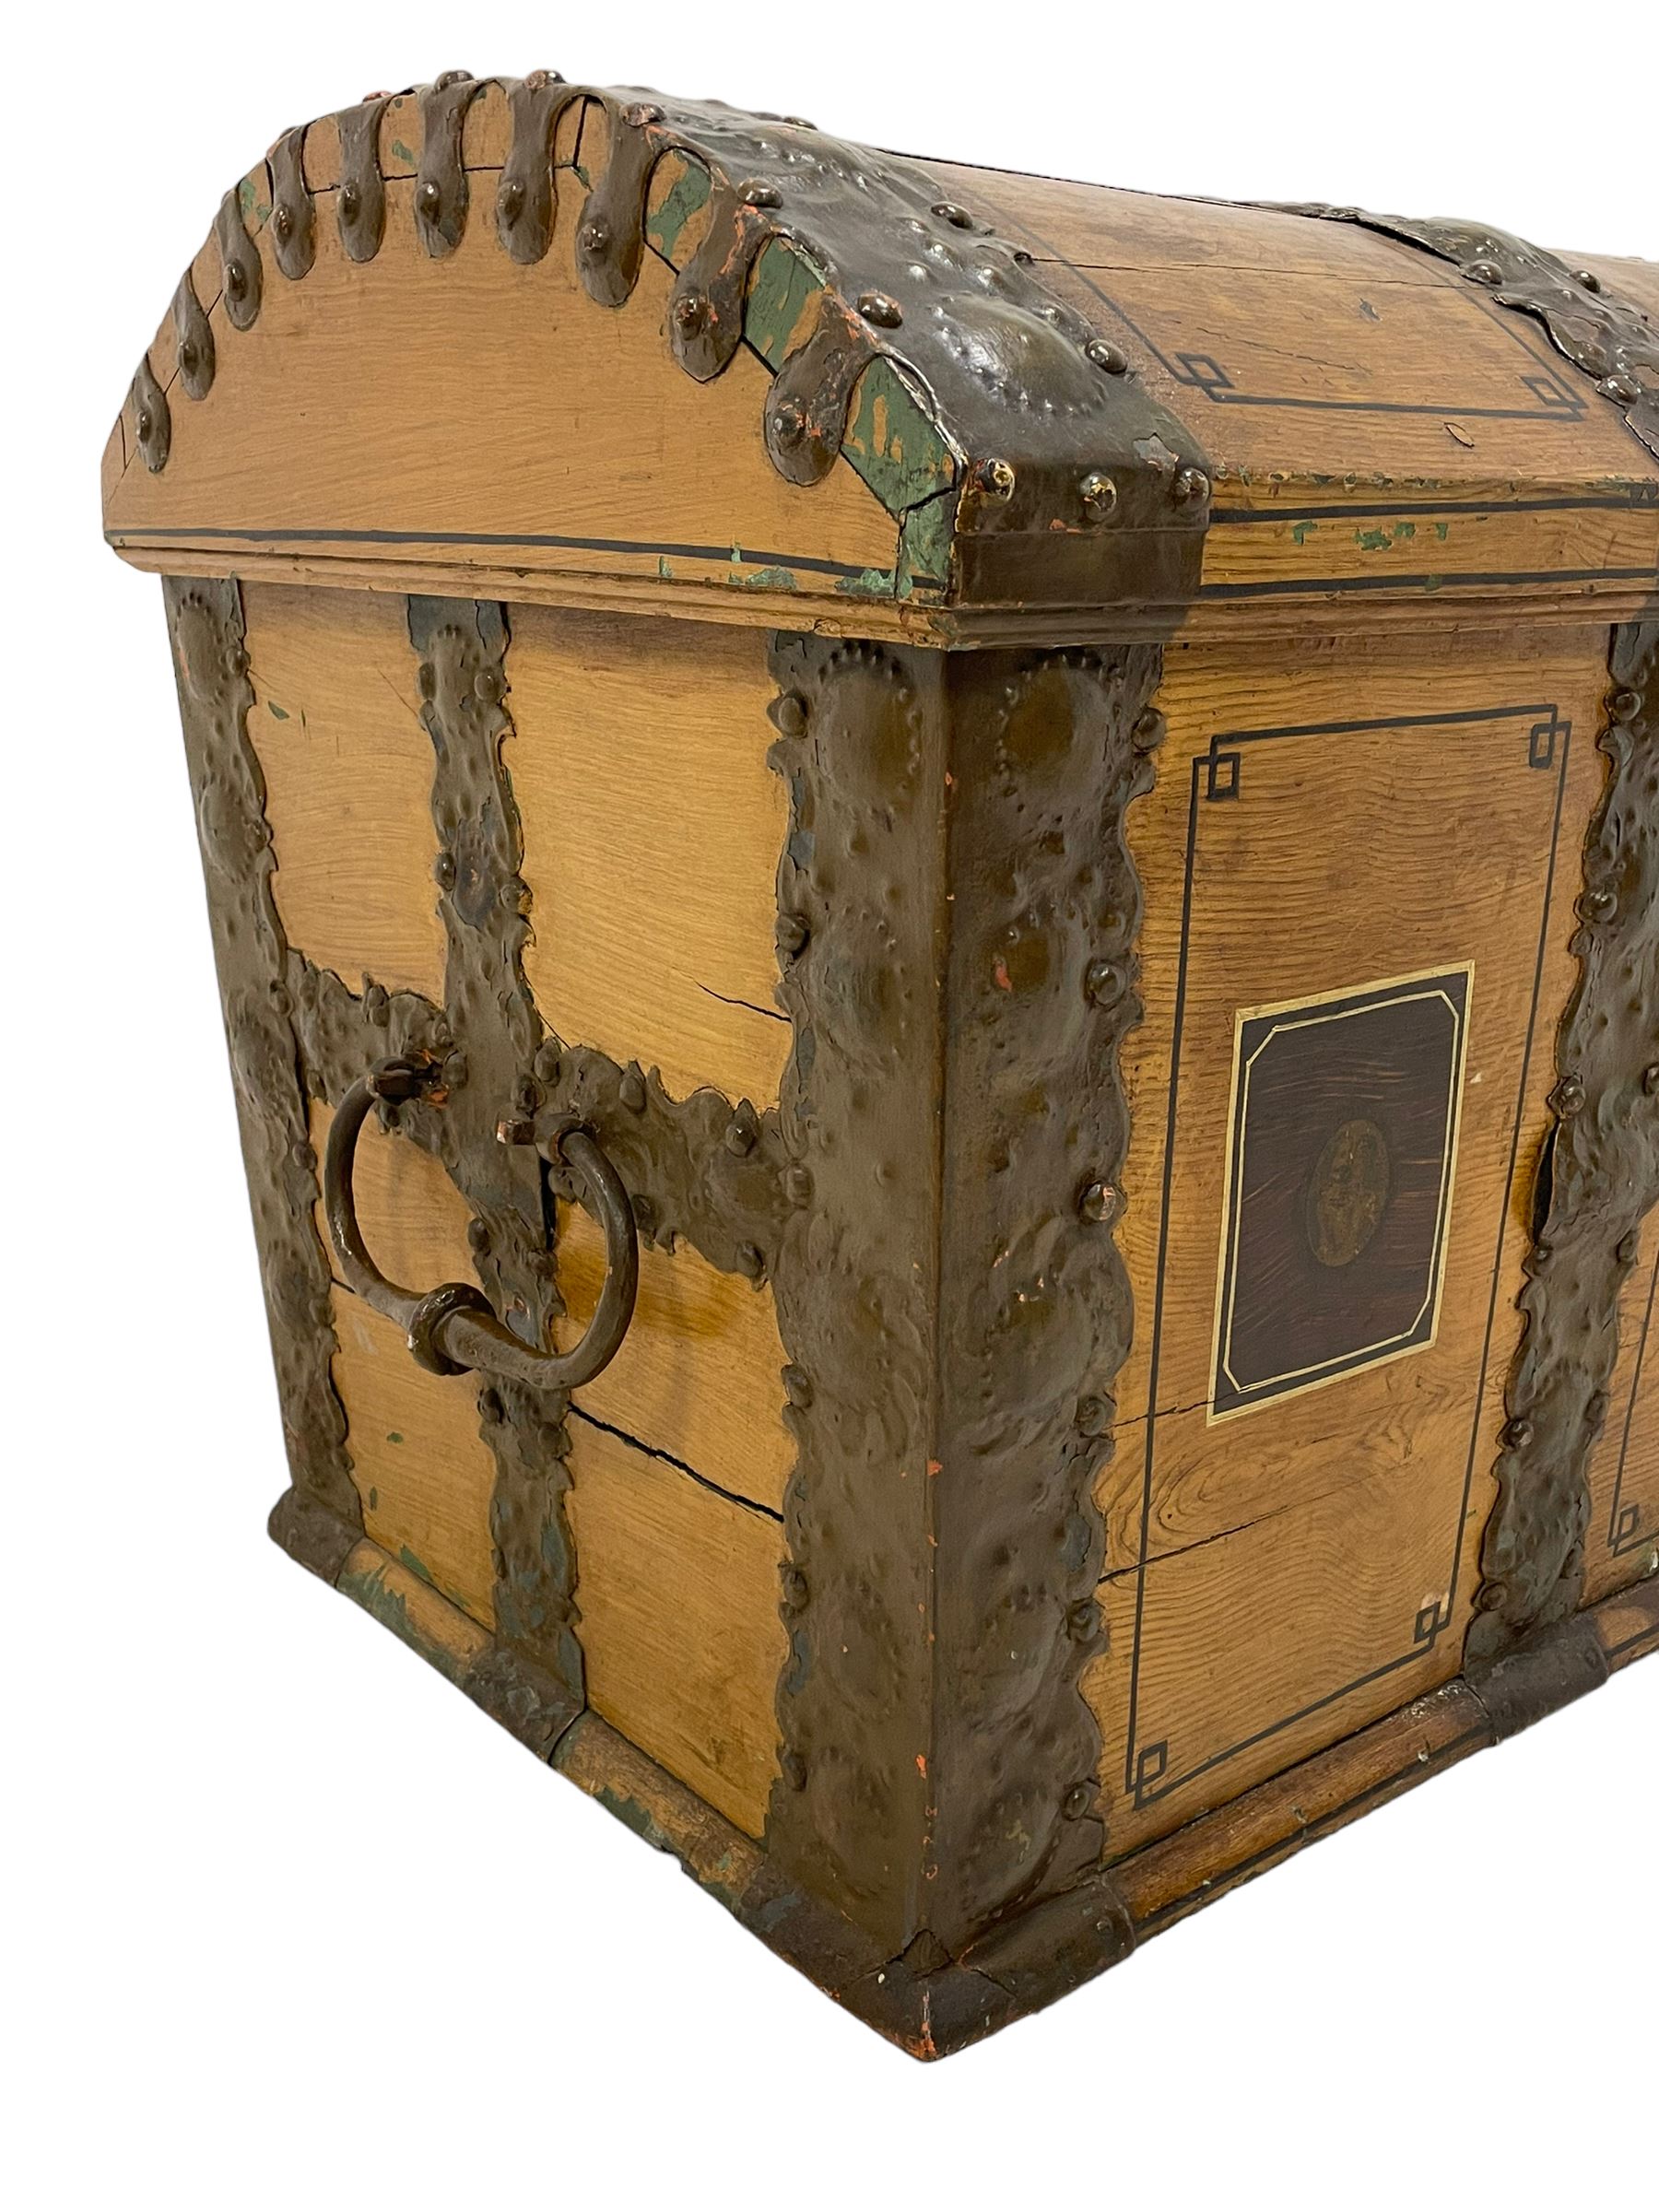 19th century Northern European painted oak sea chest - Image 2 of 29